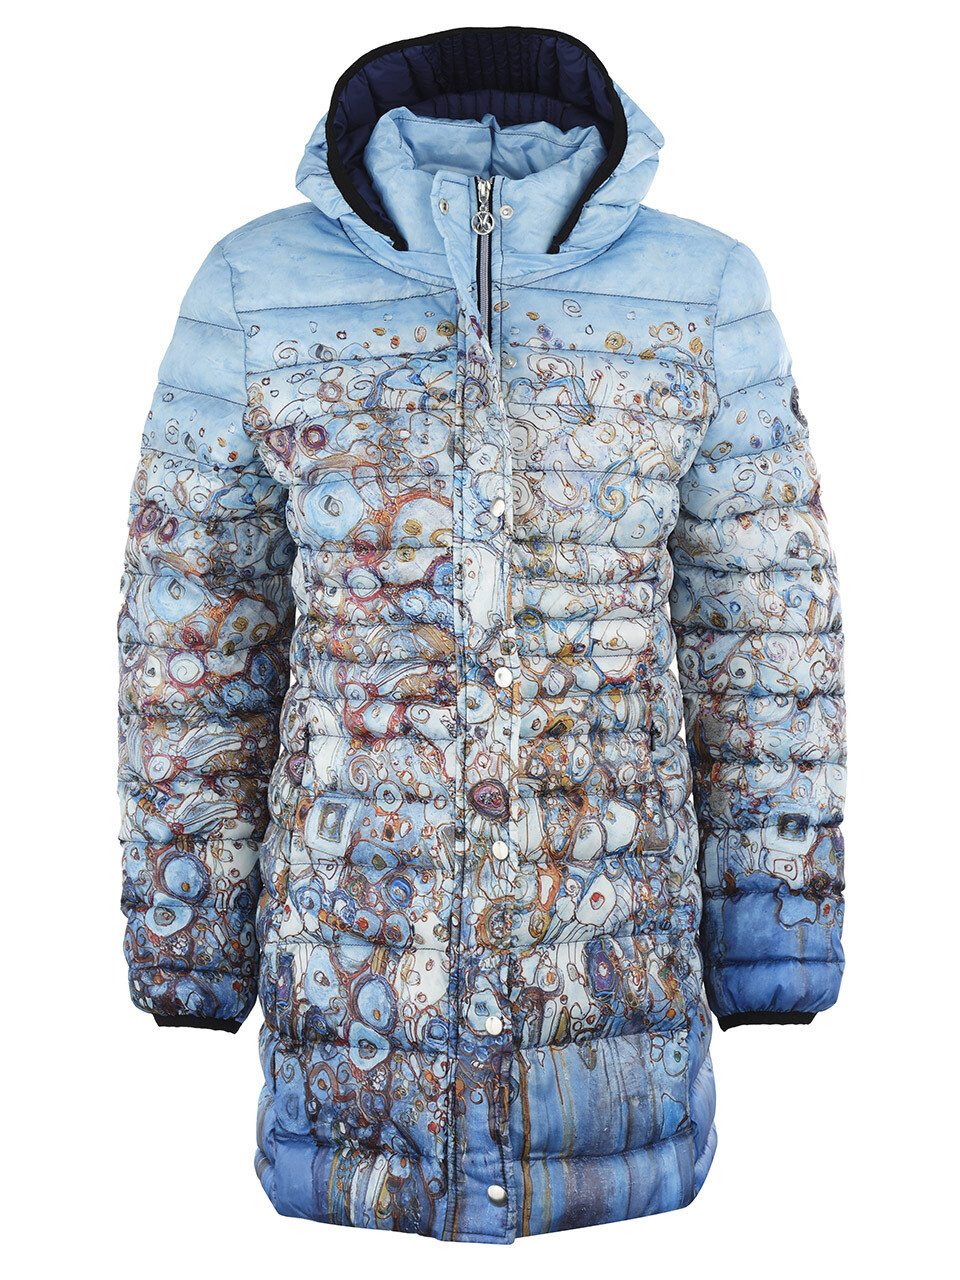 Simply Art Dolcezza: Symphonie Abstract Art Puffer Coat (1 Available at Special Price!)